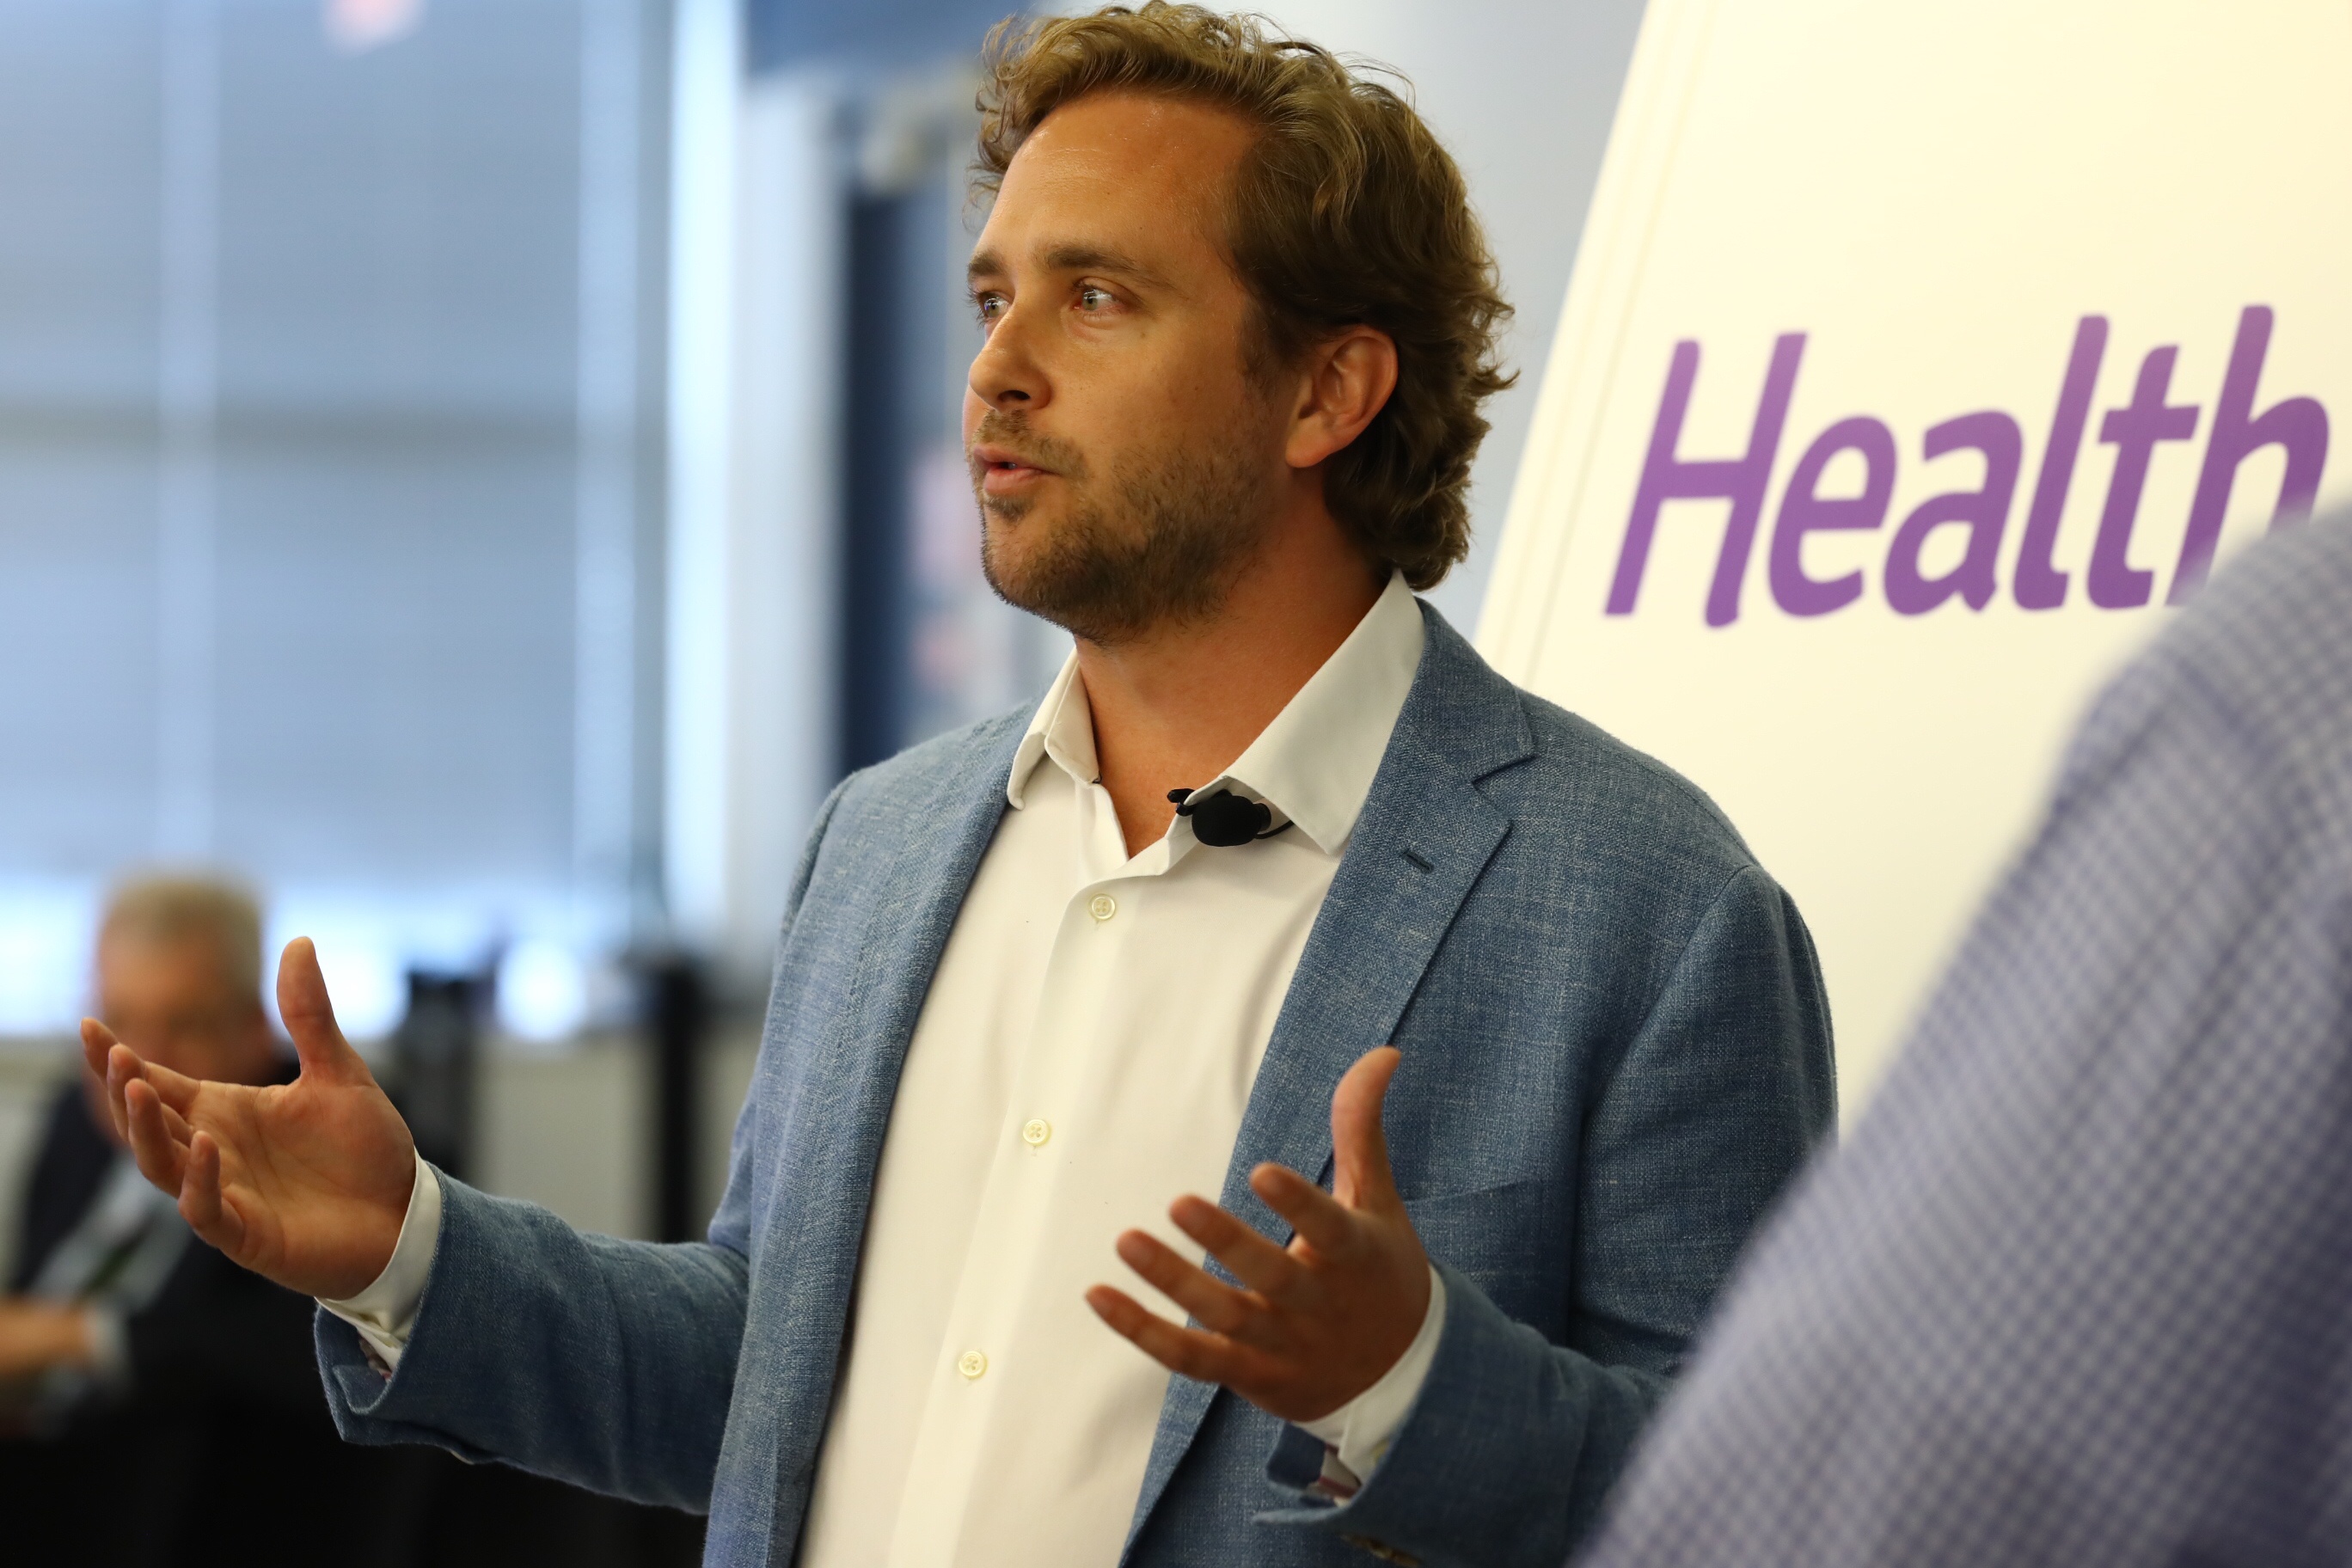 Justin Holland, Founder and CEO of HealthJoy